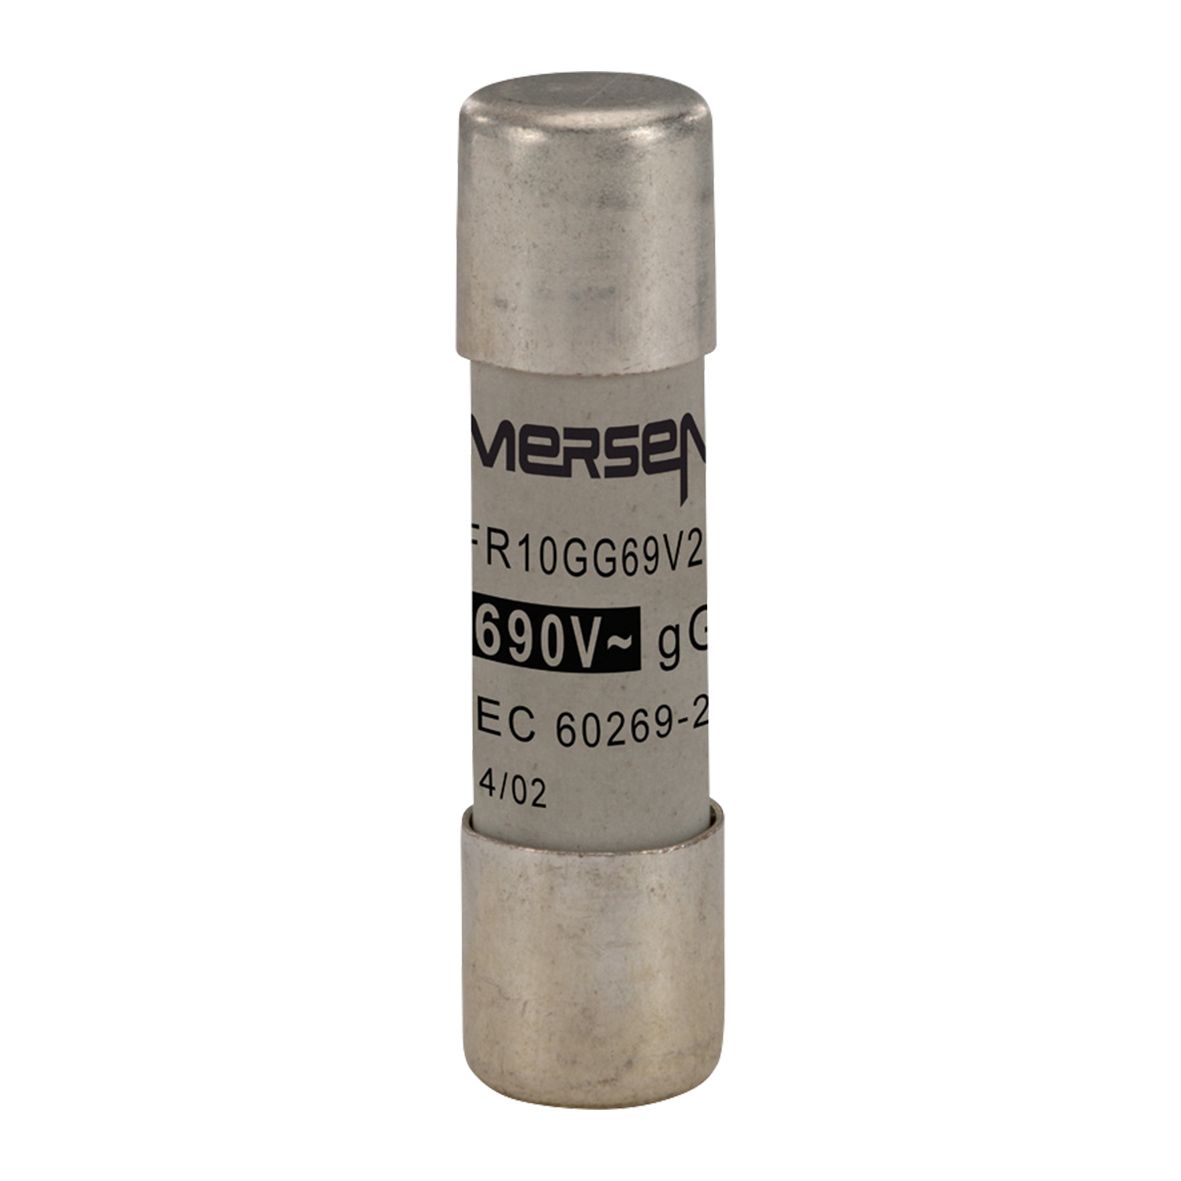 S302788 - Cylindrical fuse-link gG 690VAC 10.3x38, 2A